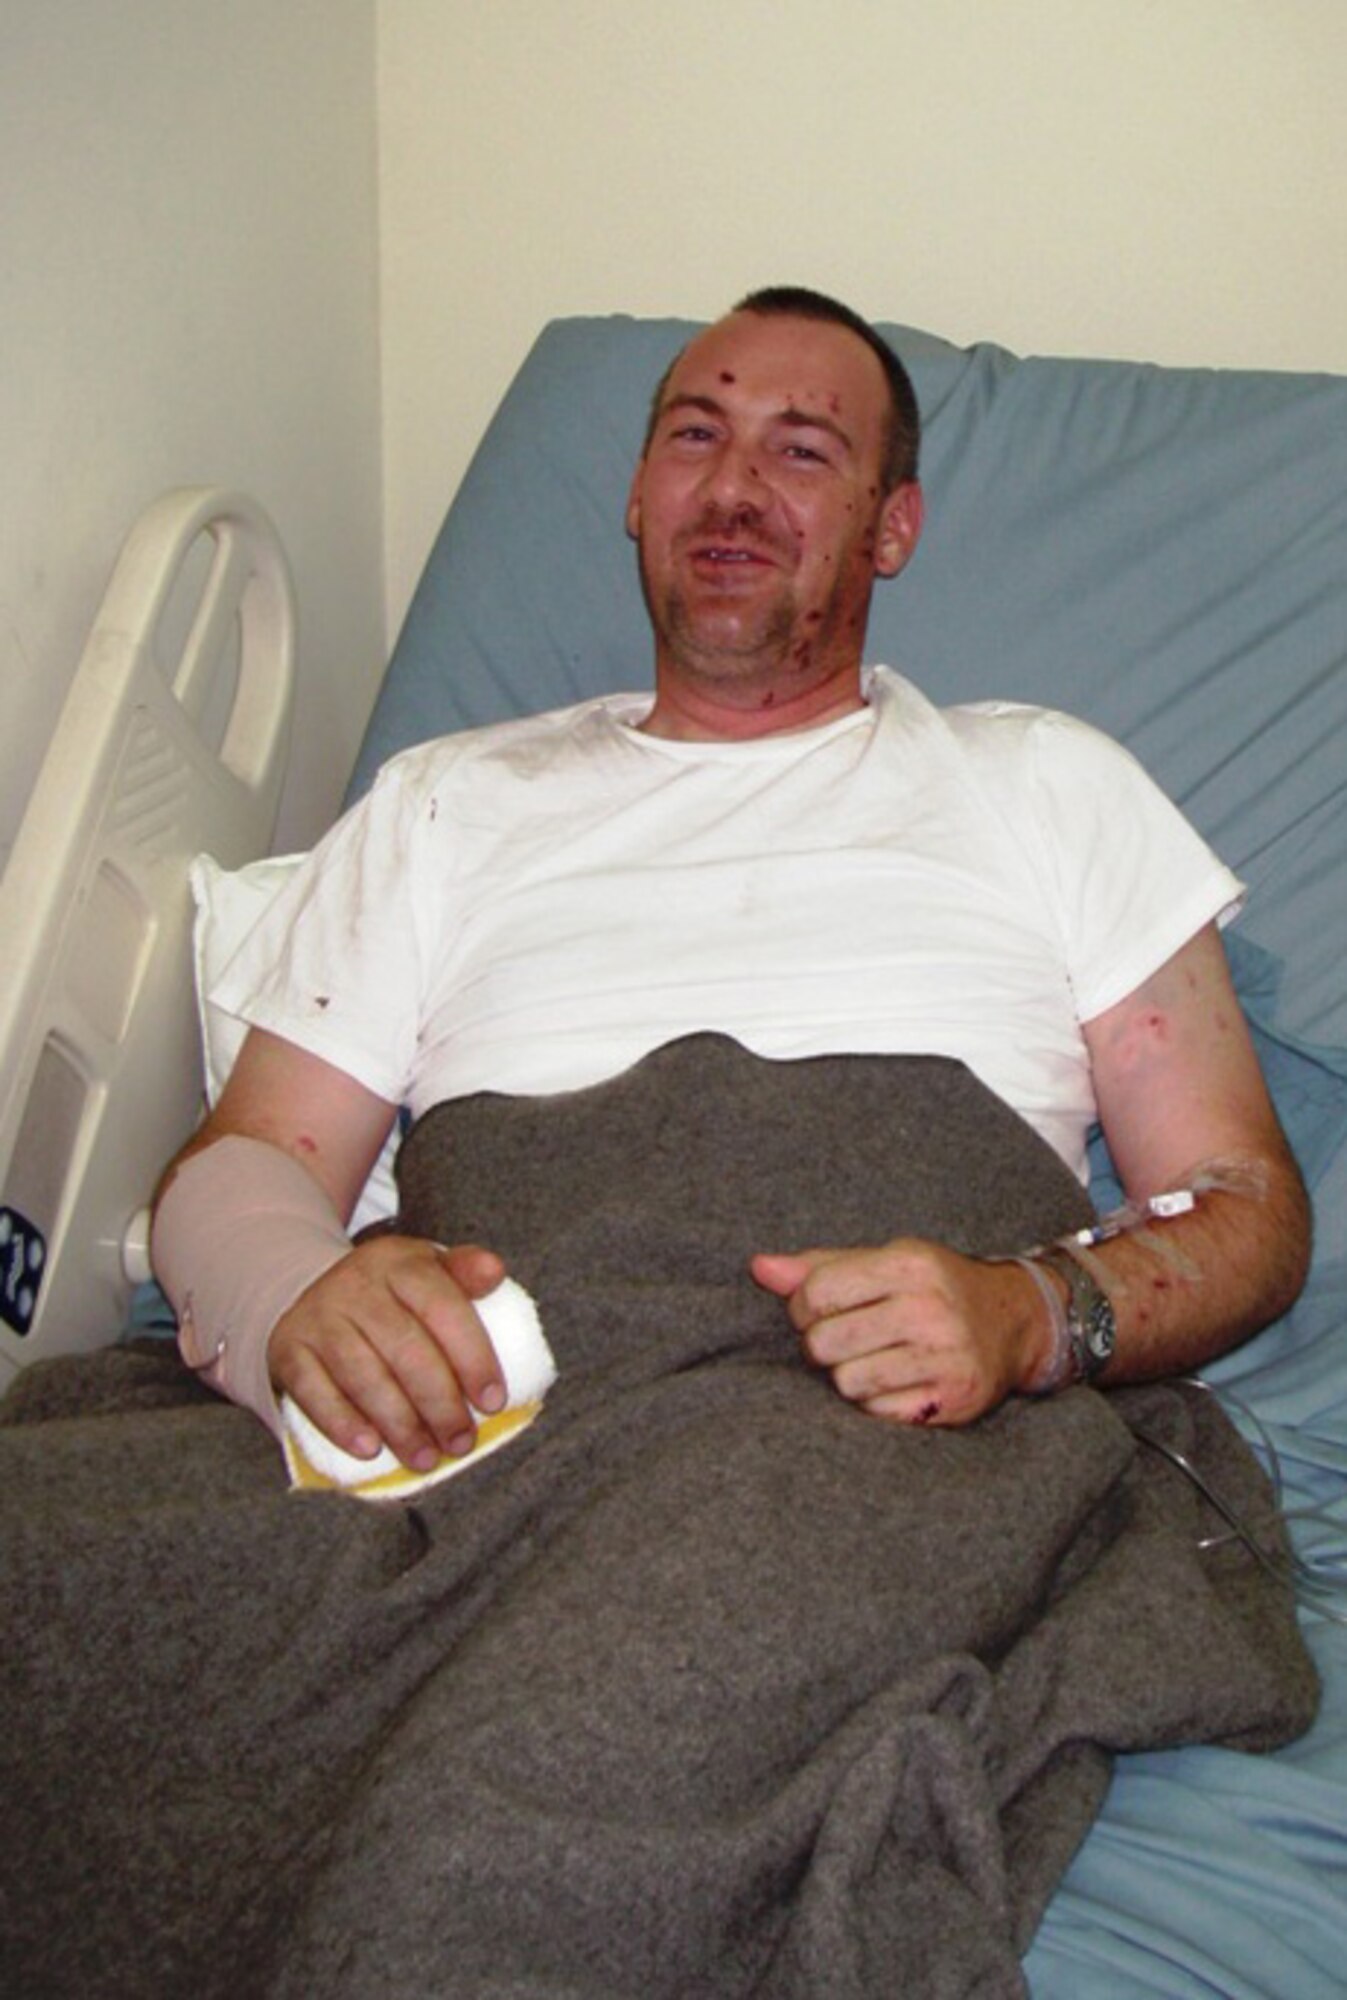 DOVER AIR FORCE BASE, Del. -- Master Sgt. Jeremy Henner, 436th Civil Engineer Squadron explosive ordnance disposal flight chief from Dover Air Force Base, Del., sits in a hospital bed in Baghdad, Iraq, one day after he was injured in an explosion. He was awarded a Purple Heart Aug. 24. (U.S. Air Force courtesy photo)